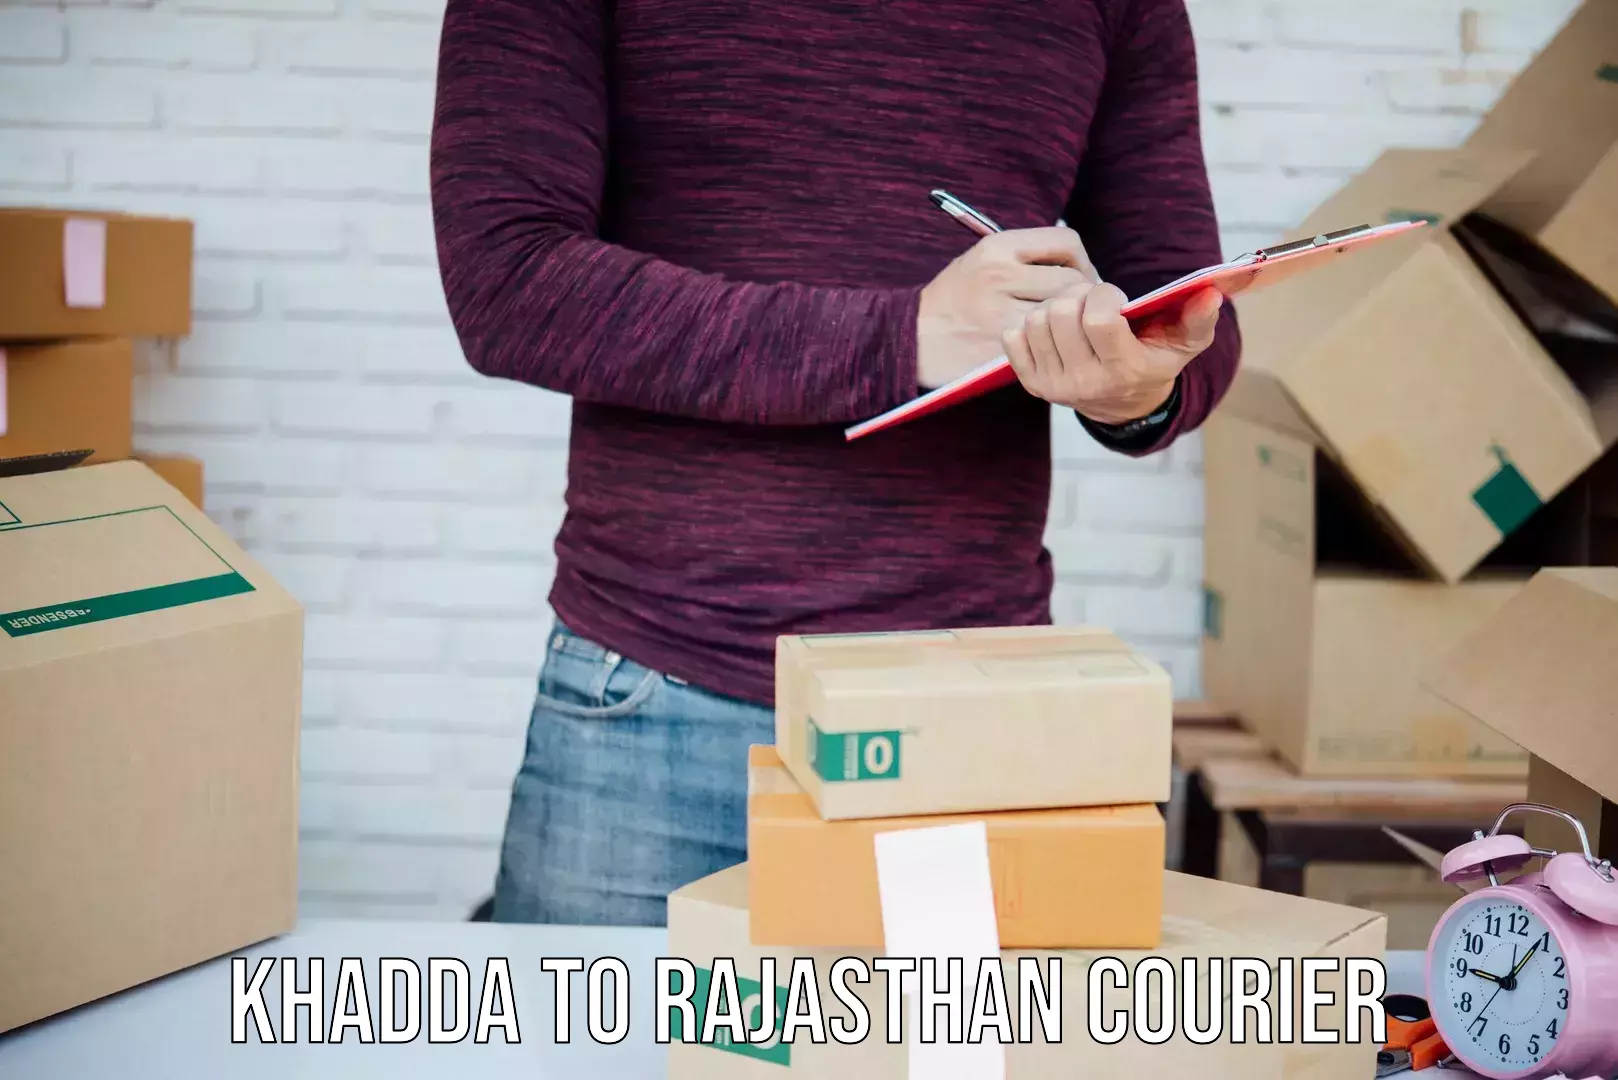 Advanced delivery network Khadda to Rajasthan